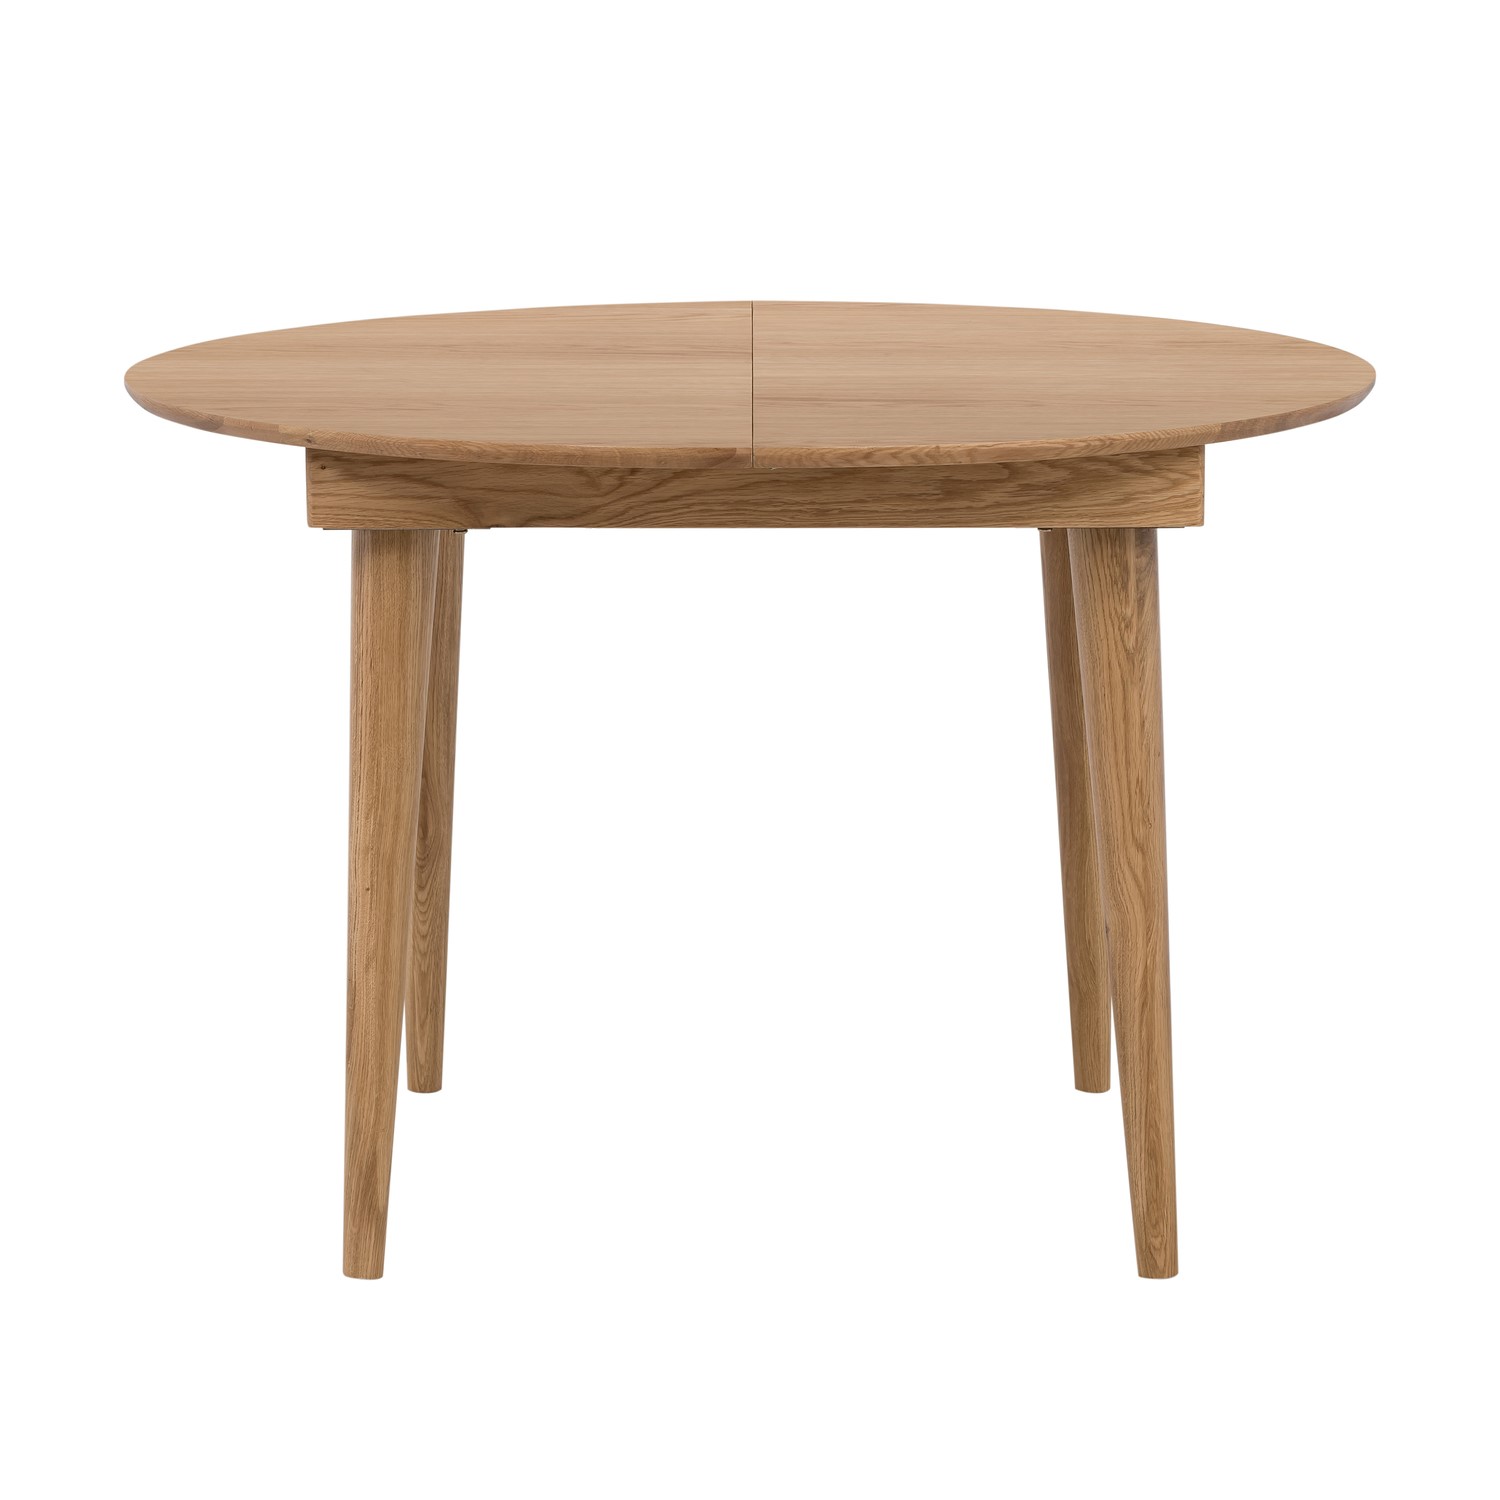 Photo of Solid oak round extendable dining table - seats 2-4 - marny